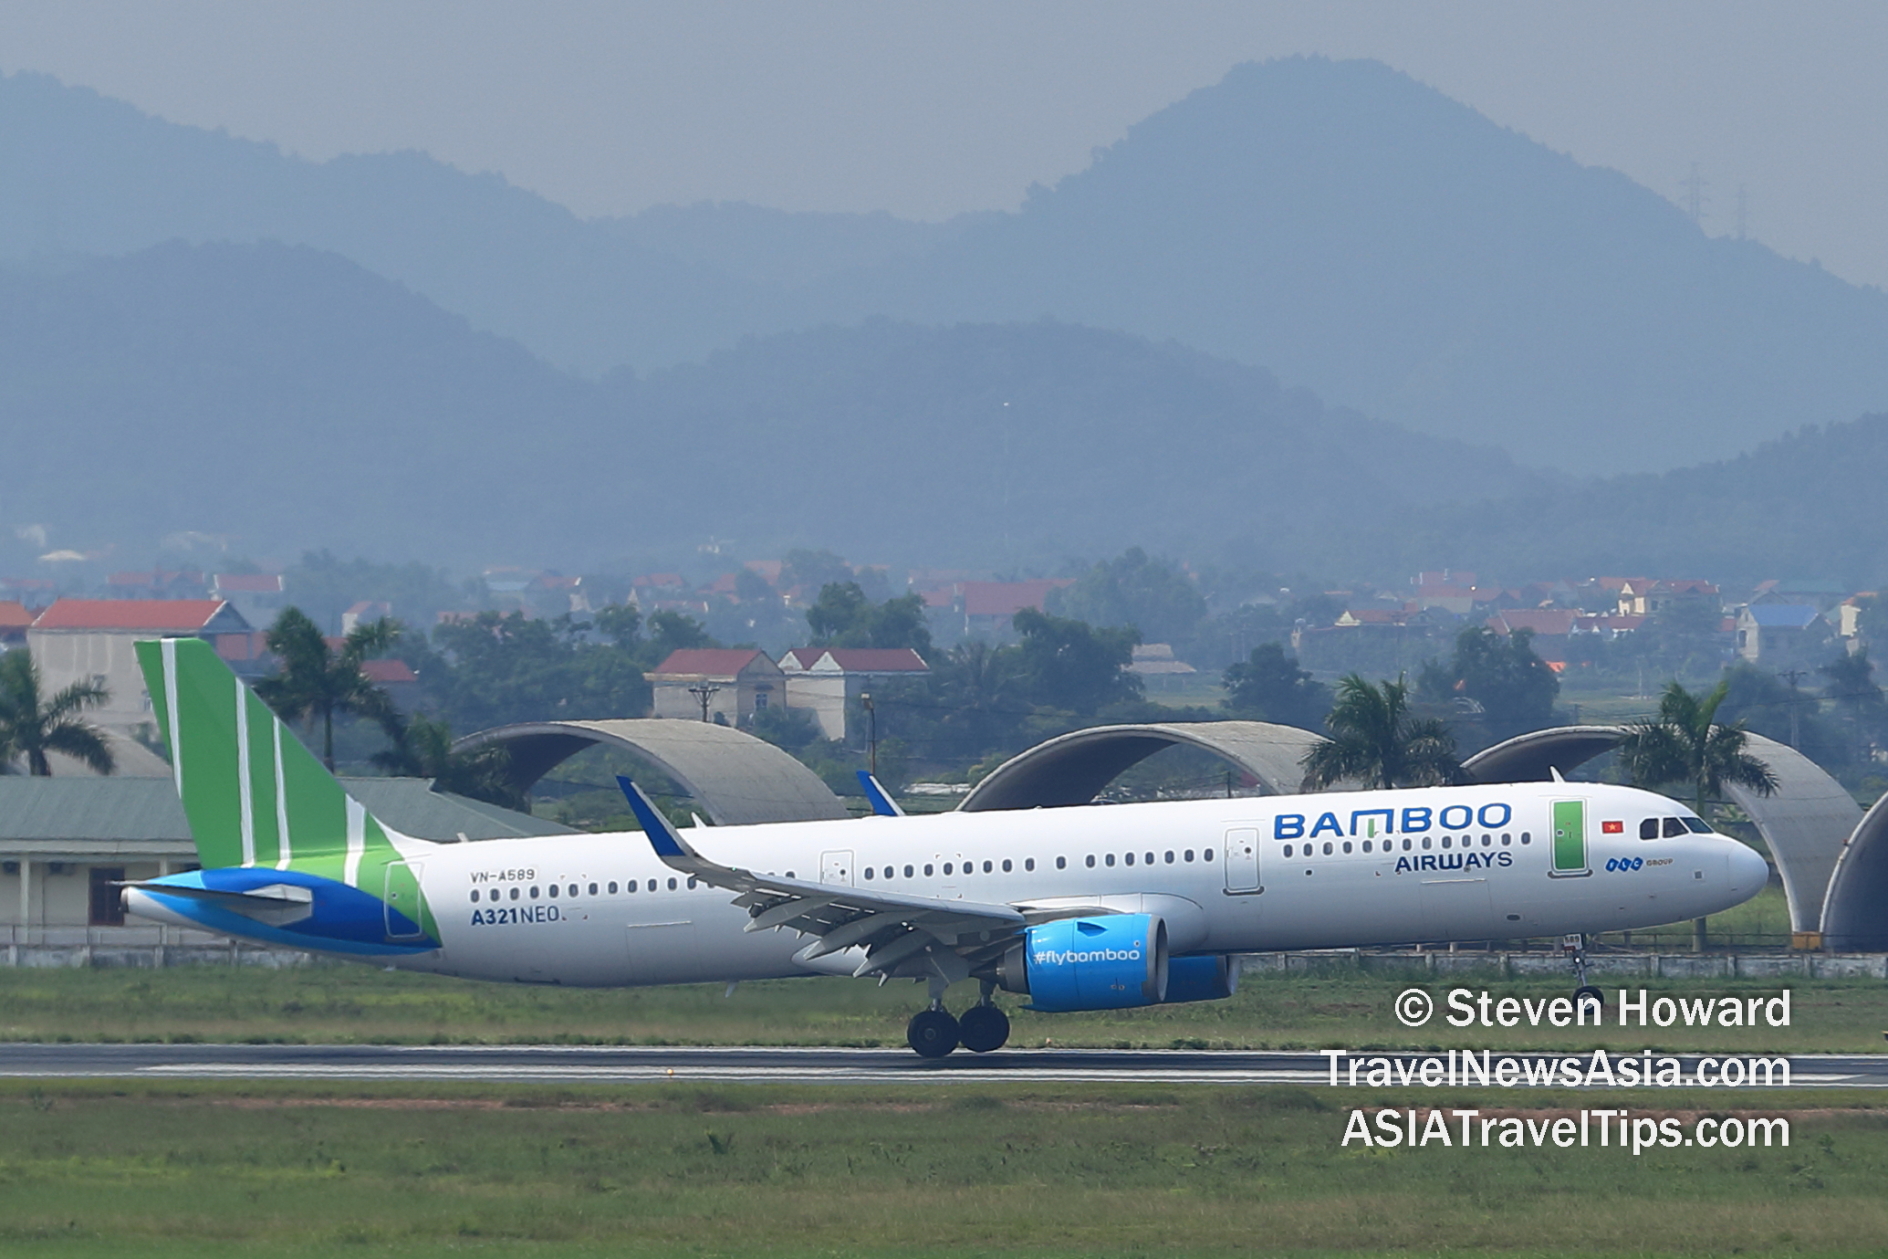 Bamboo Airways Airbus A321neo reg: VN-A589. Picture by Steven Howard of TravelNewsAsia.com Click to enlarge.